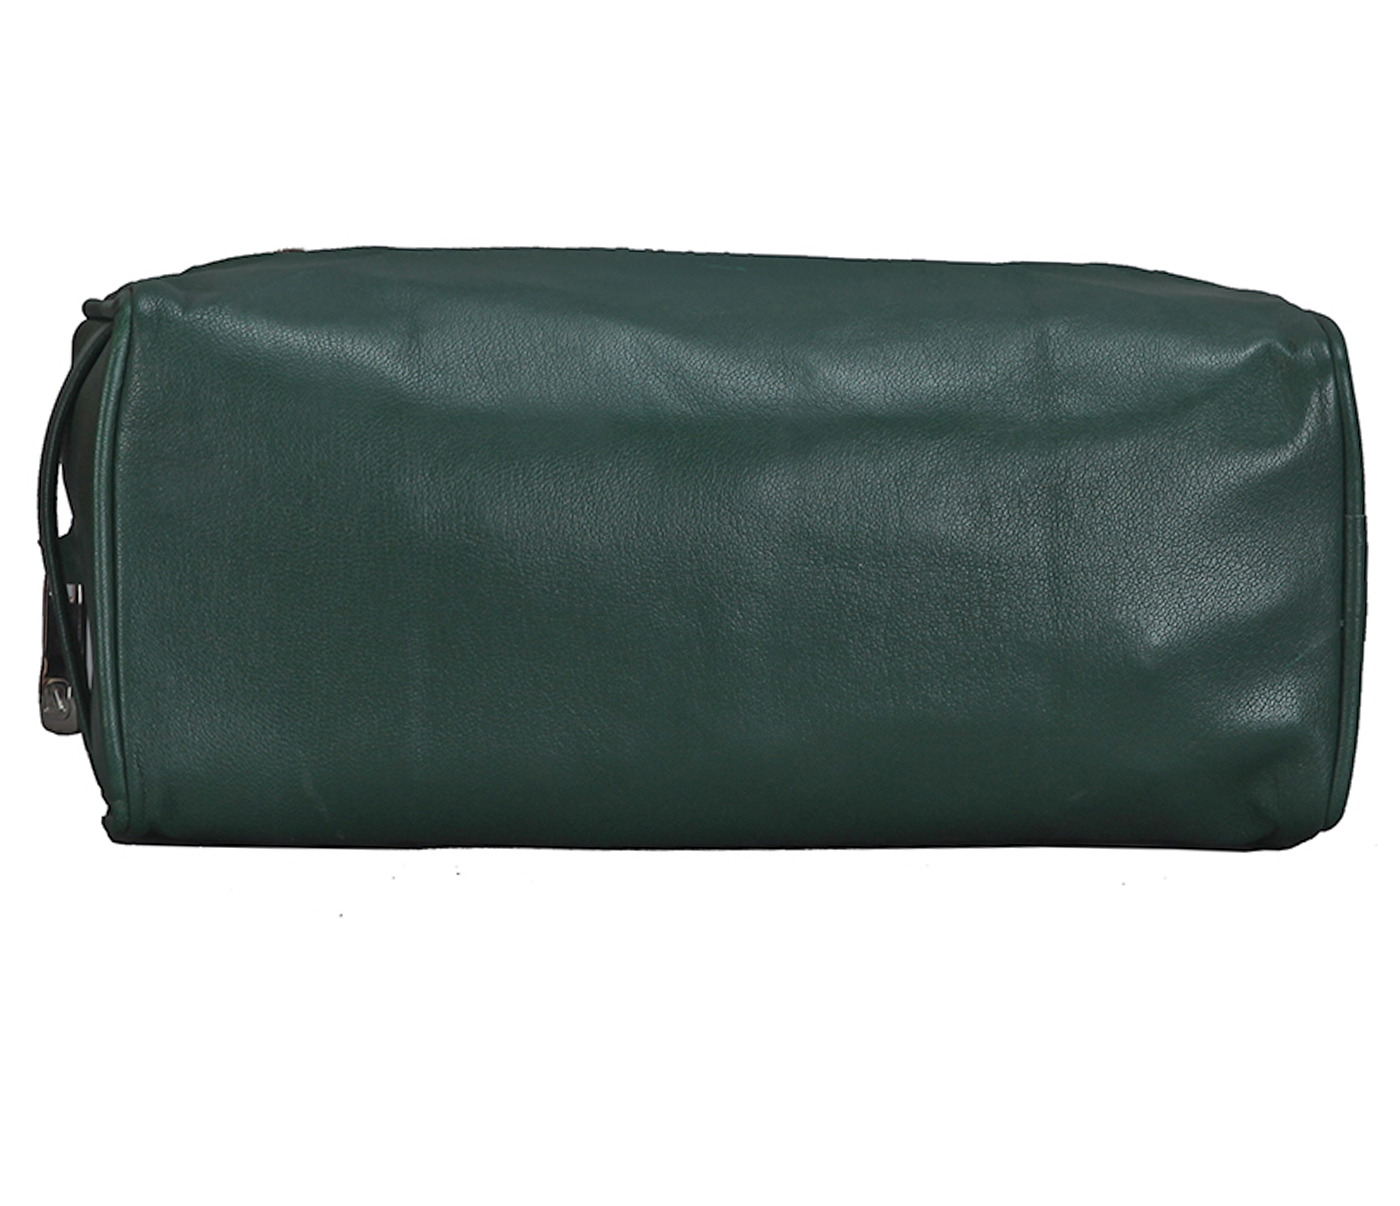 Travel Essential--Unisex Wash & Toiletry travel Bag in Genuine Leather - Green